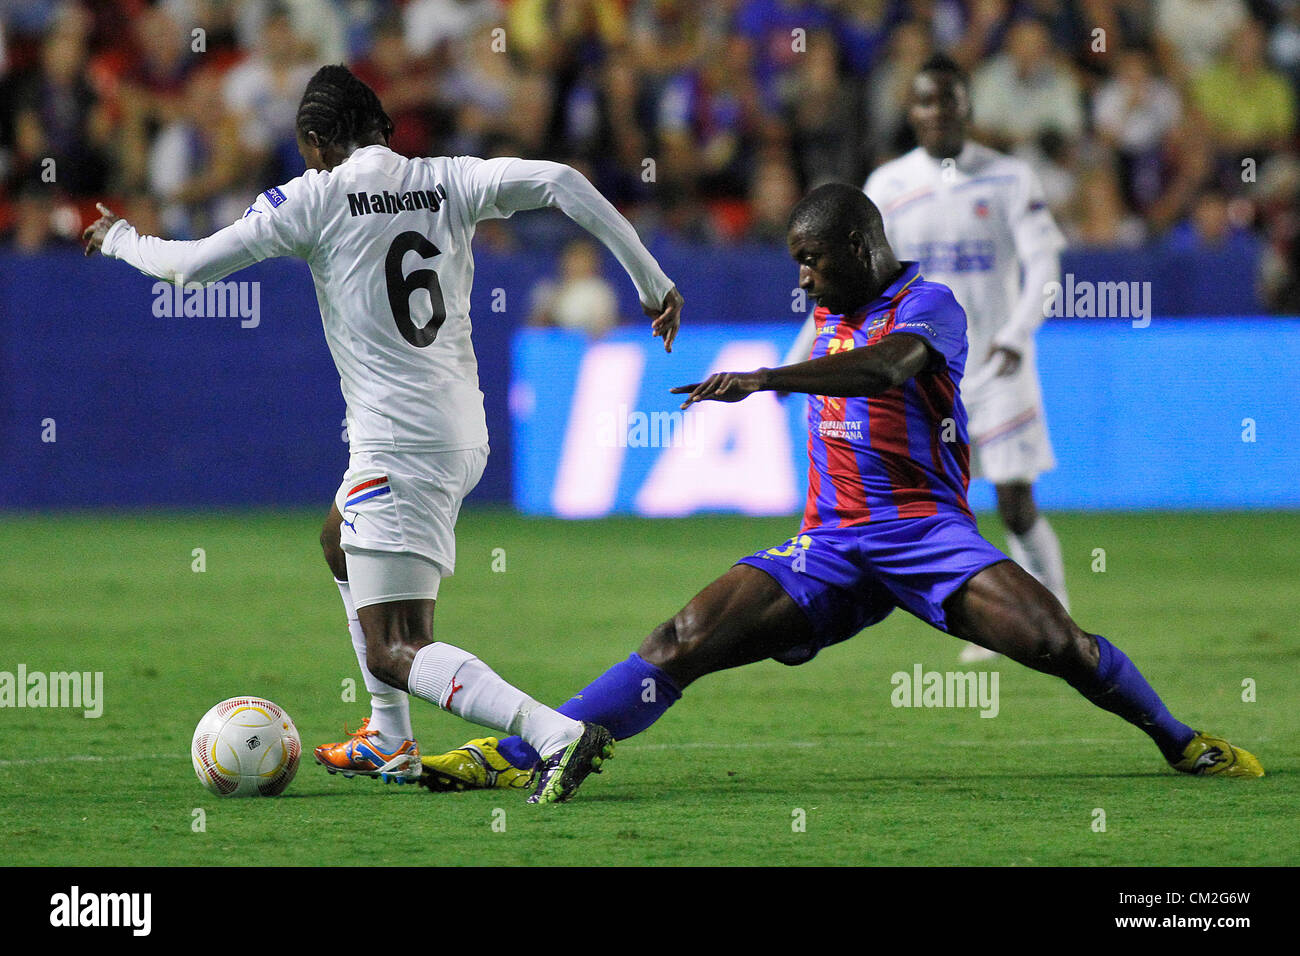 20/09/2012 - Europa League Football Europe, Group Matchday 1, Levante UD vs. Helsingborg - Diop from Levante (right) tries to tackle Mahiangu from Helsingborg Stock Photo